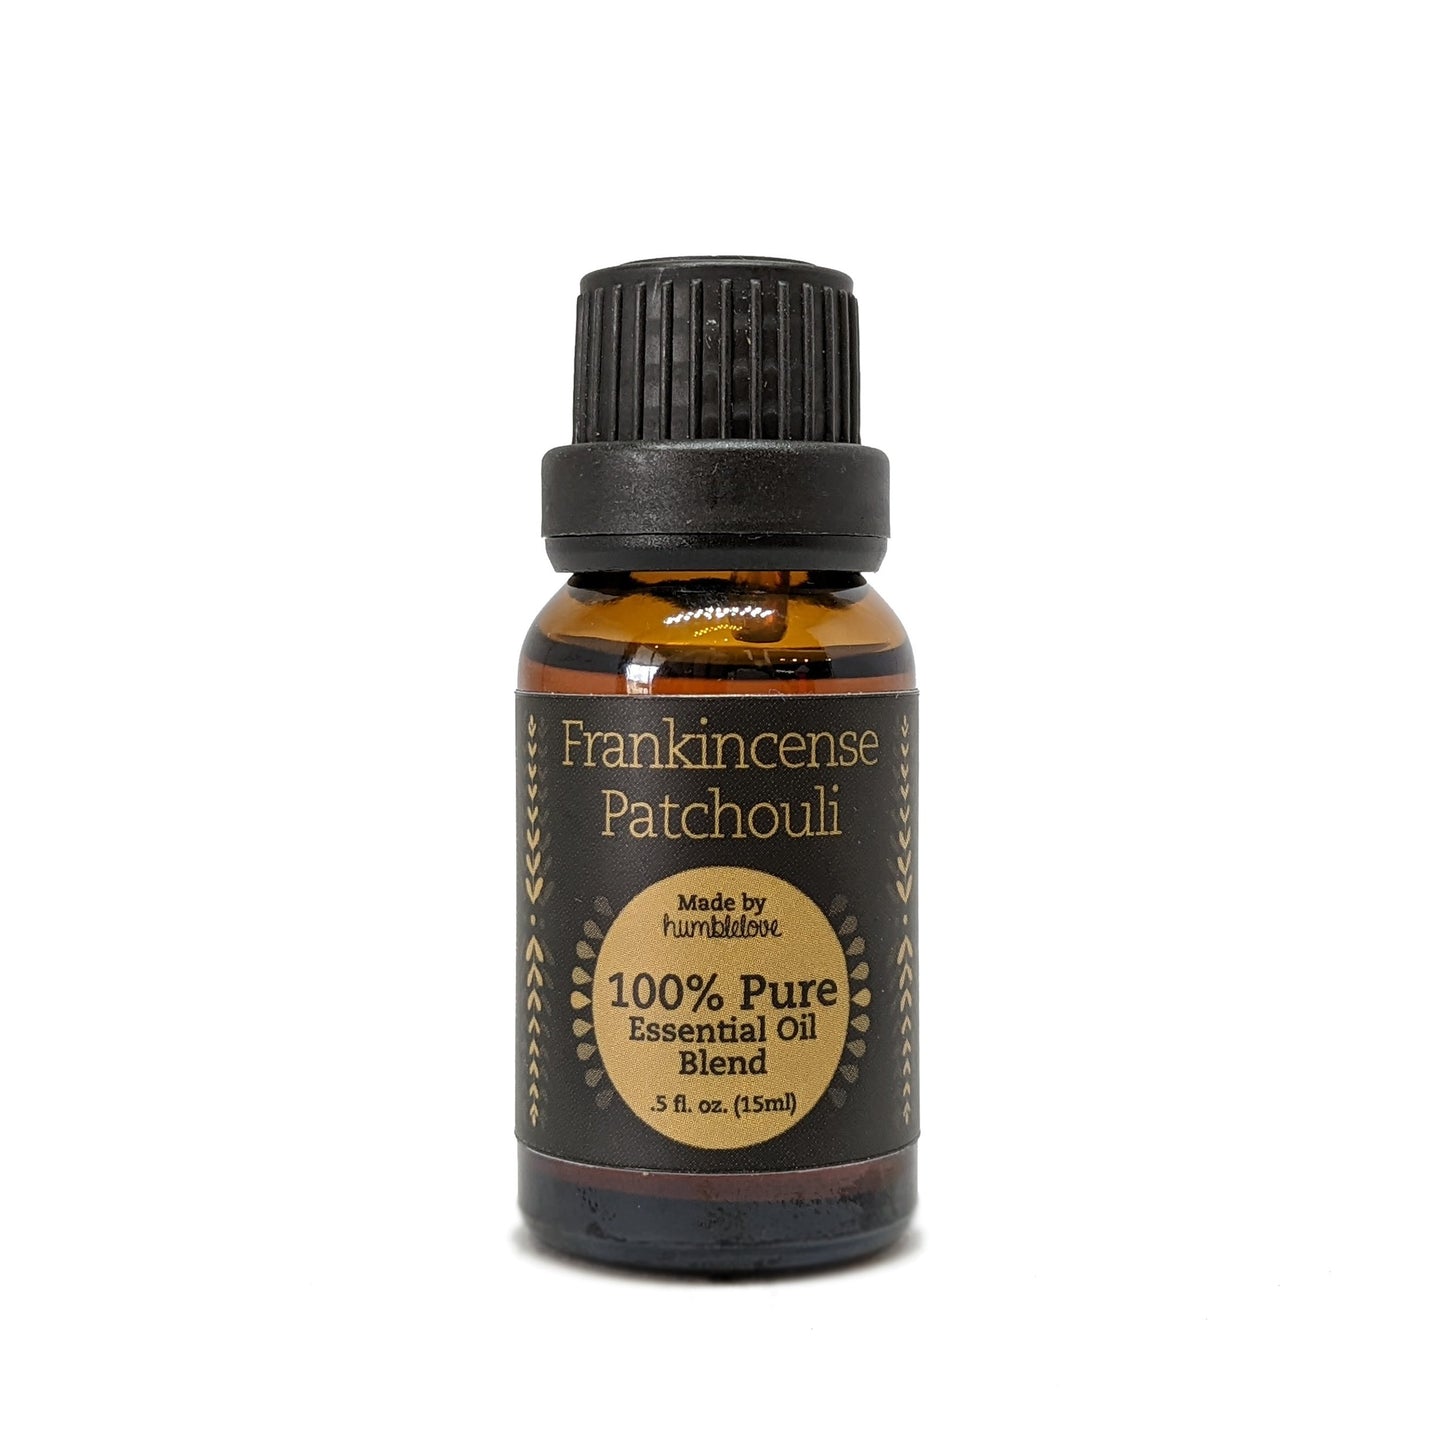 Frankincense Patchouli Aromatherapy Essential Oil Diffuser Blend